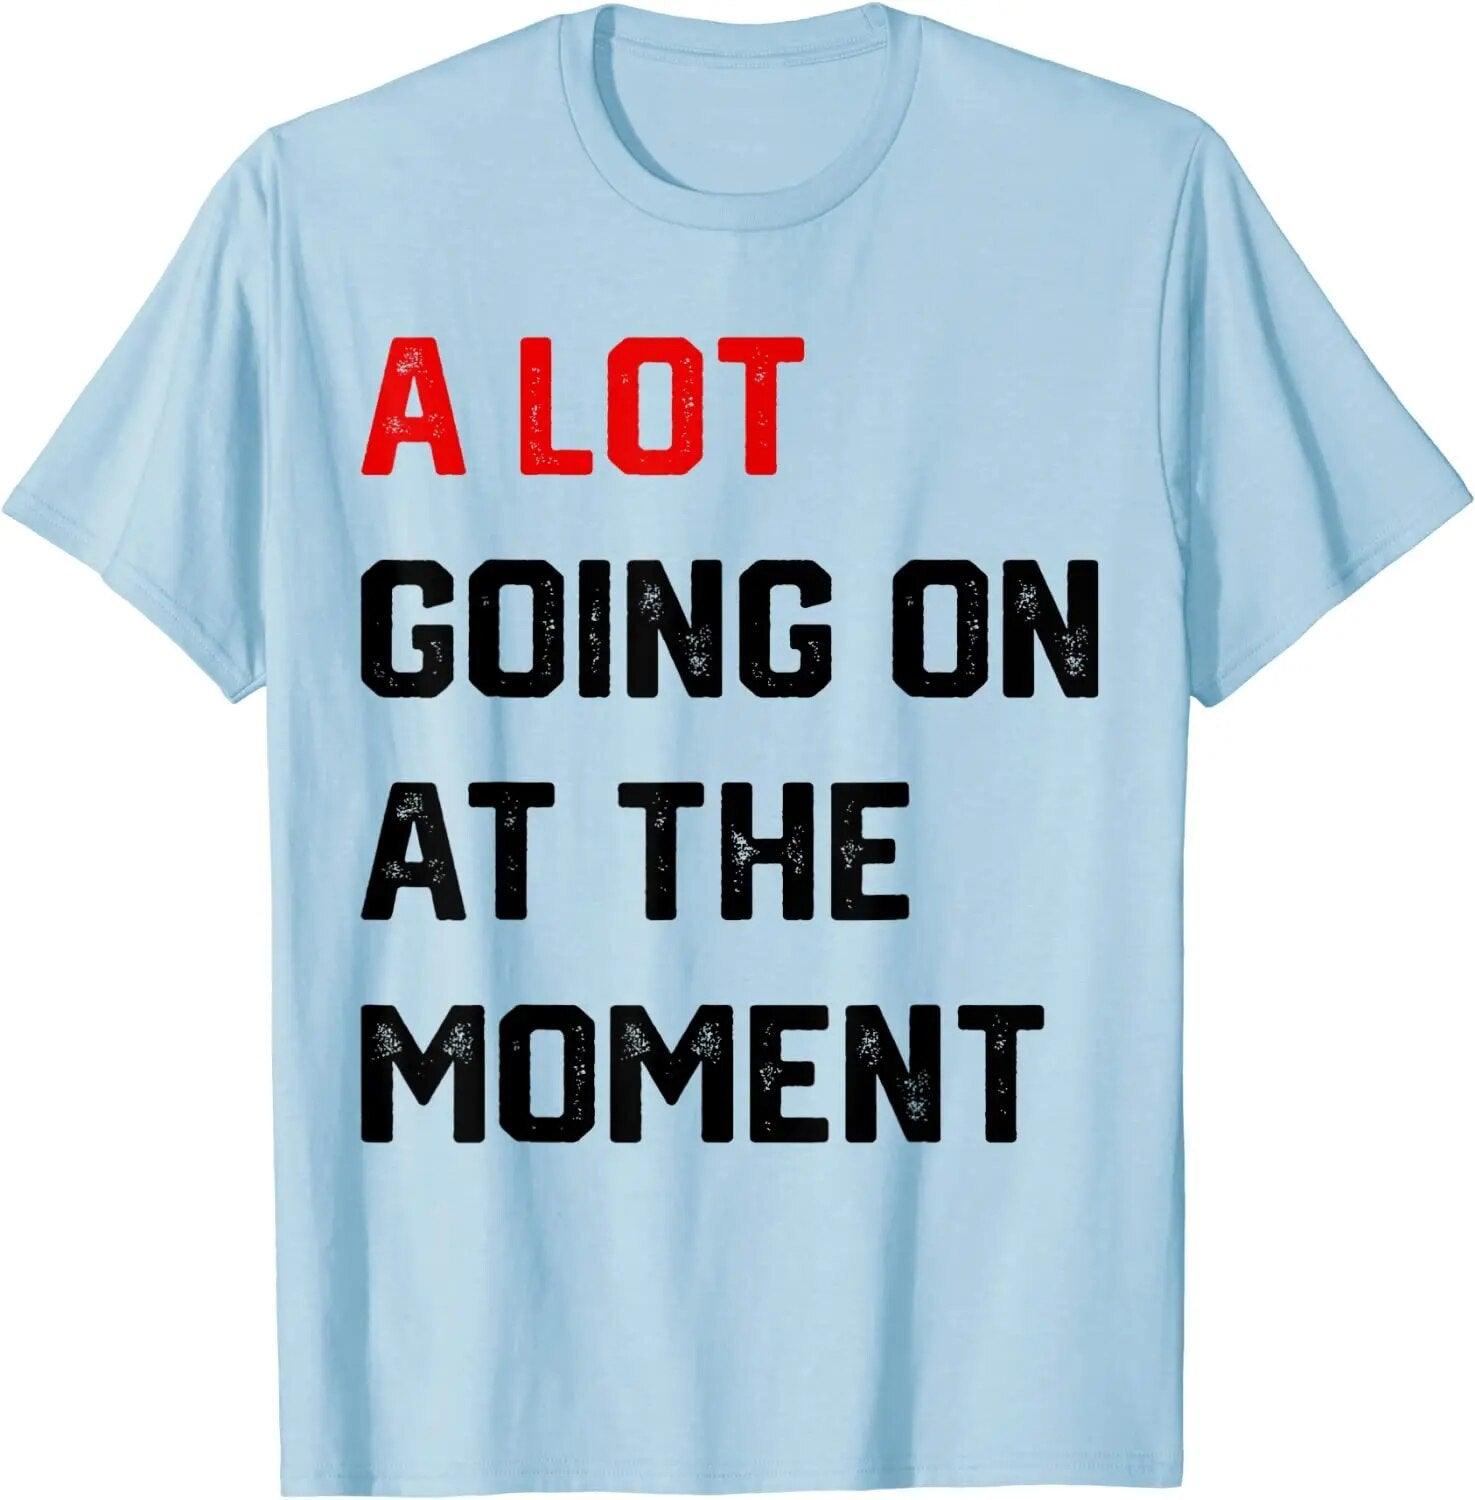 A Lot Going on At The Moment T-Shirt Funny Letters Printed Awesome Graphic Tee Tops Personality Sarcastic Sayings Quote Apparel - plusminusco.com